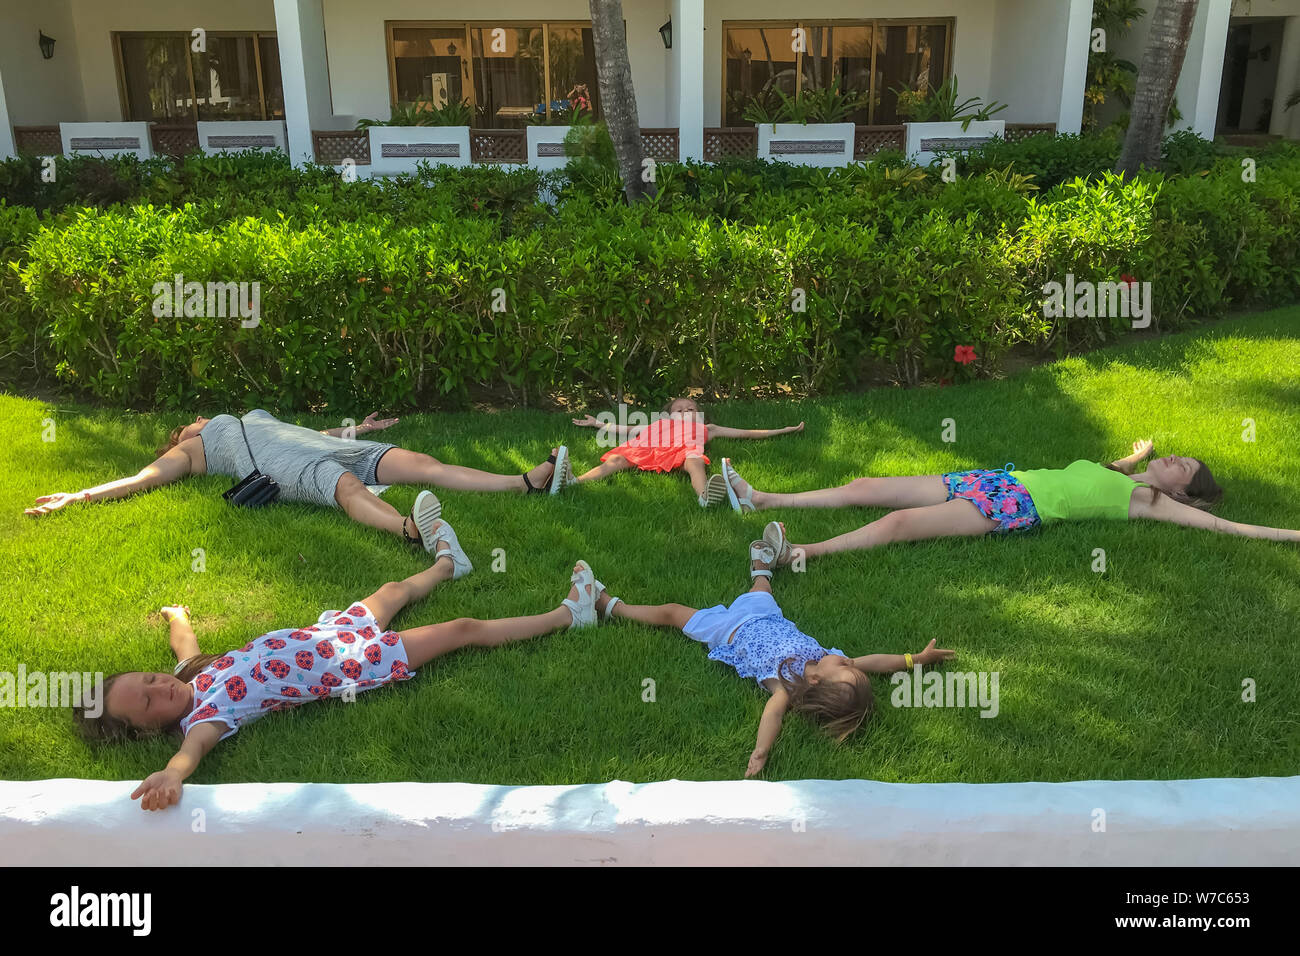 Dominican Republic, Punta Cana. June 28, 2016. The girls lie on the grass with arms and legs outstretched. An asterisk of people. The concept of rest Stock Photo